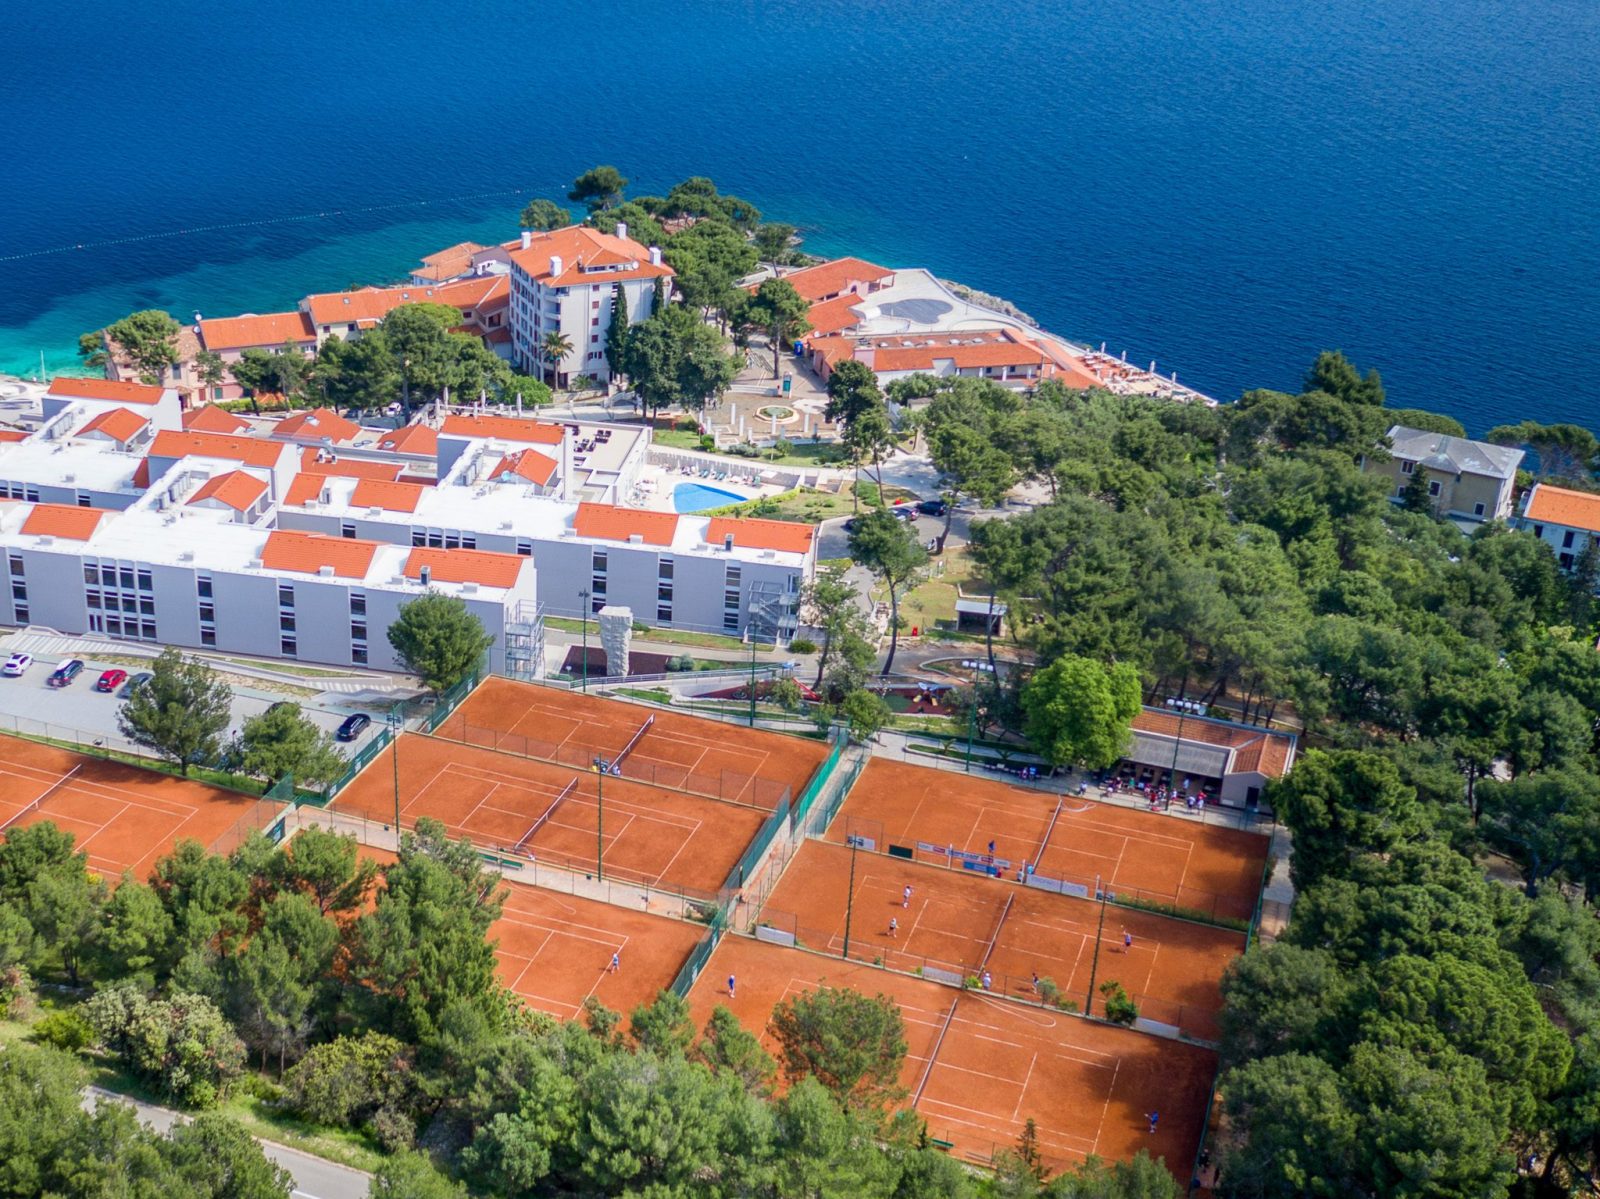 Premium 4 star Vitality Hotel Punta and tennis courts at Ljubicic Tennis Academy